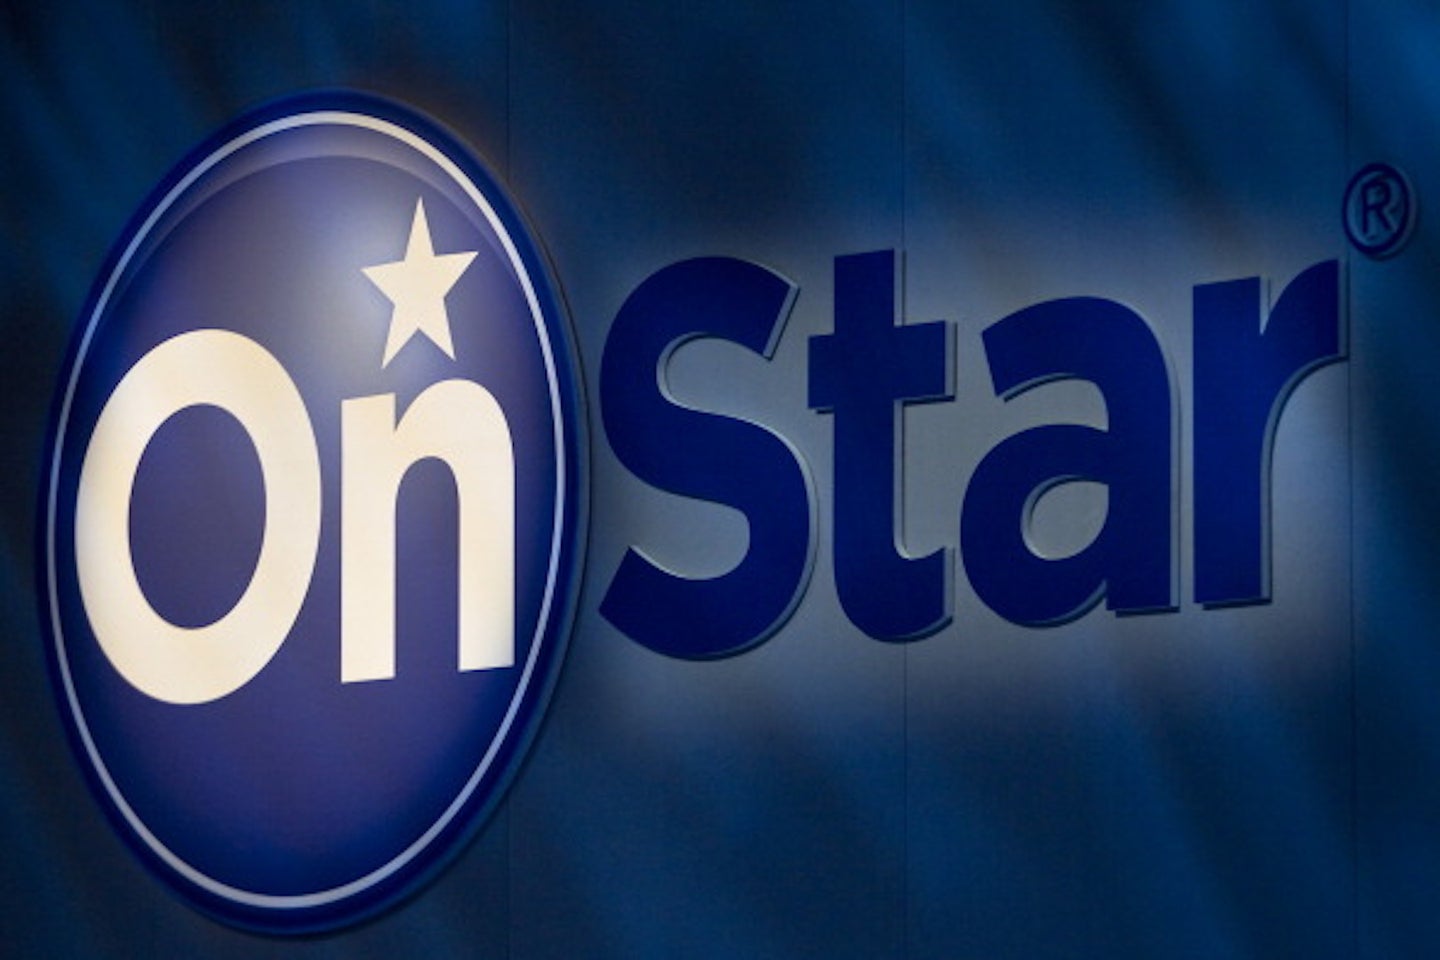 OnStar Helps Dallas Police Catch Band of Carjackers